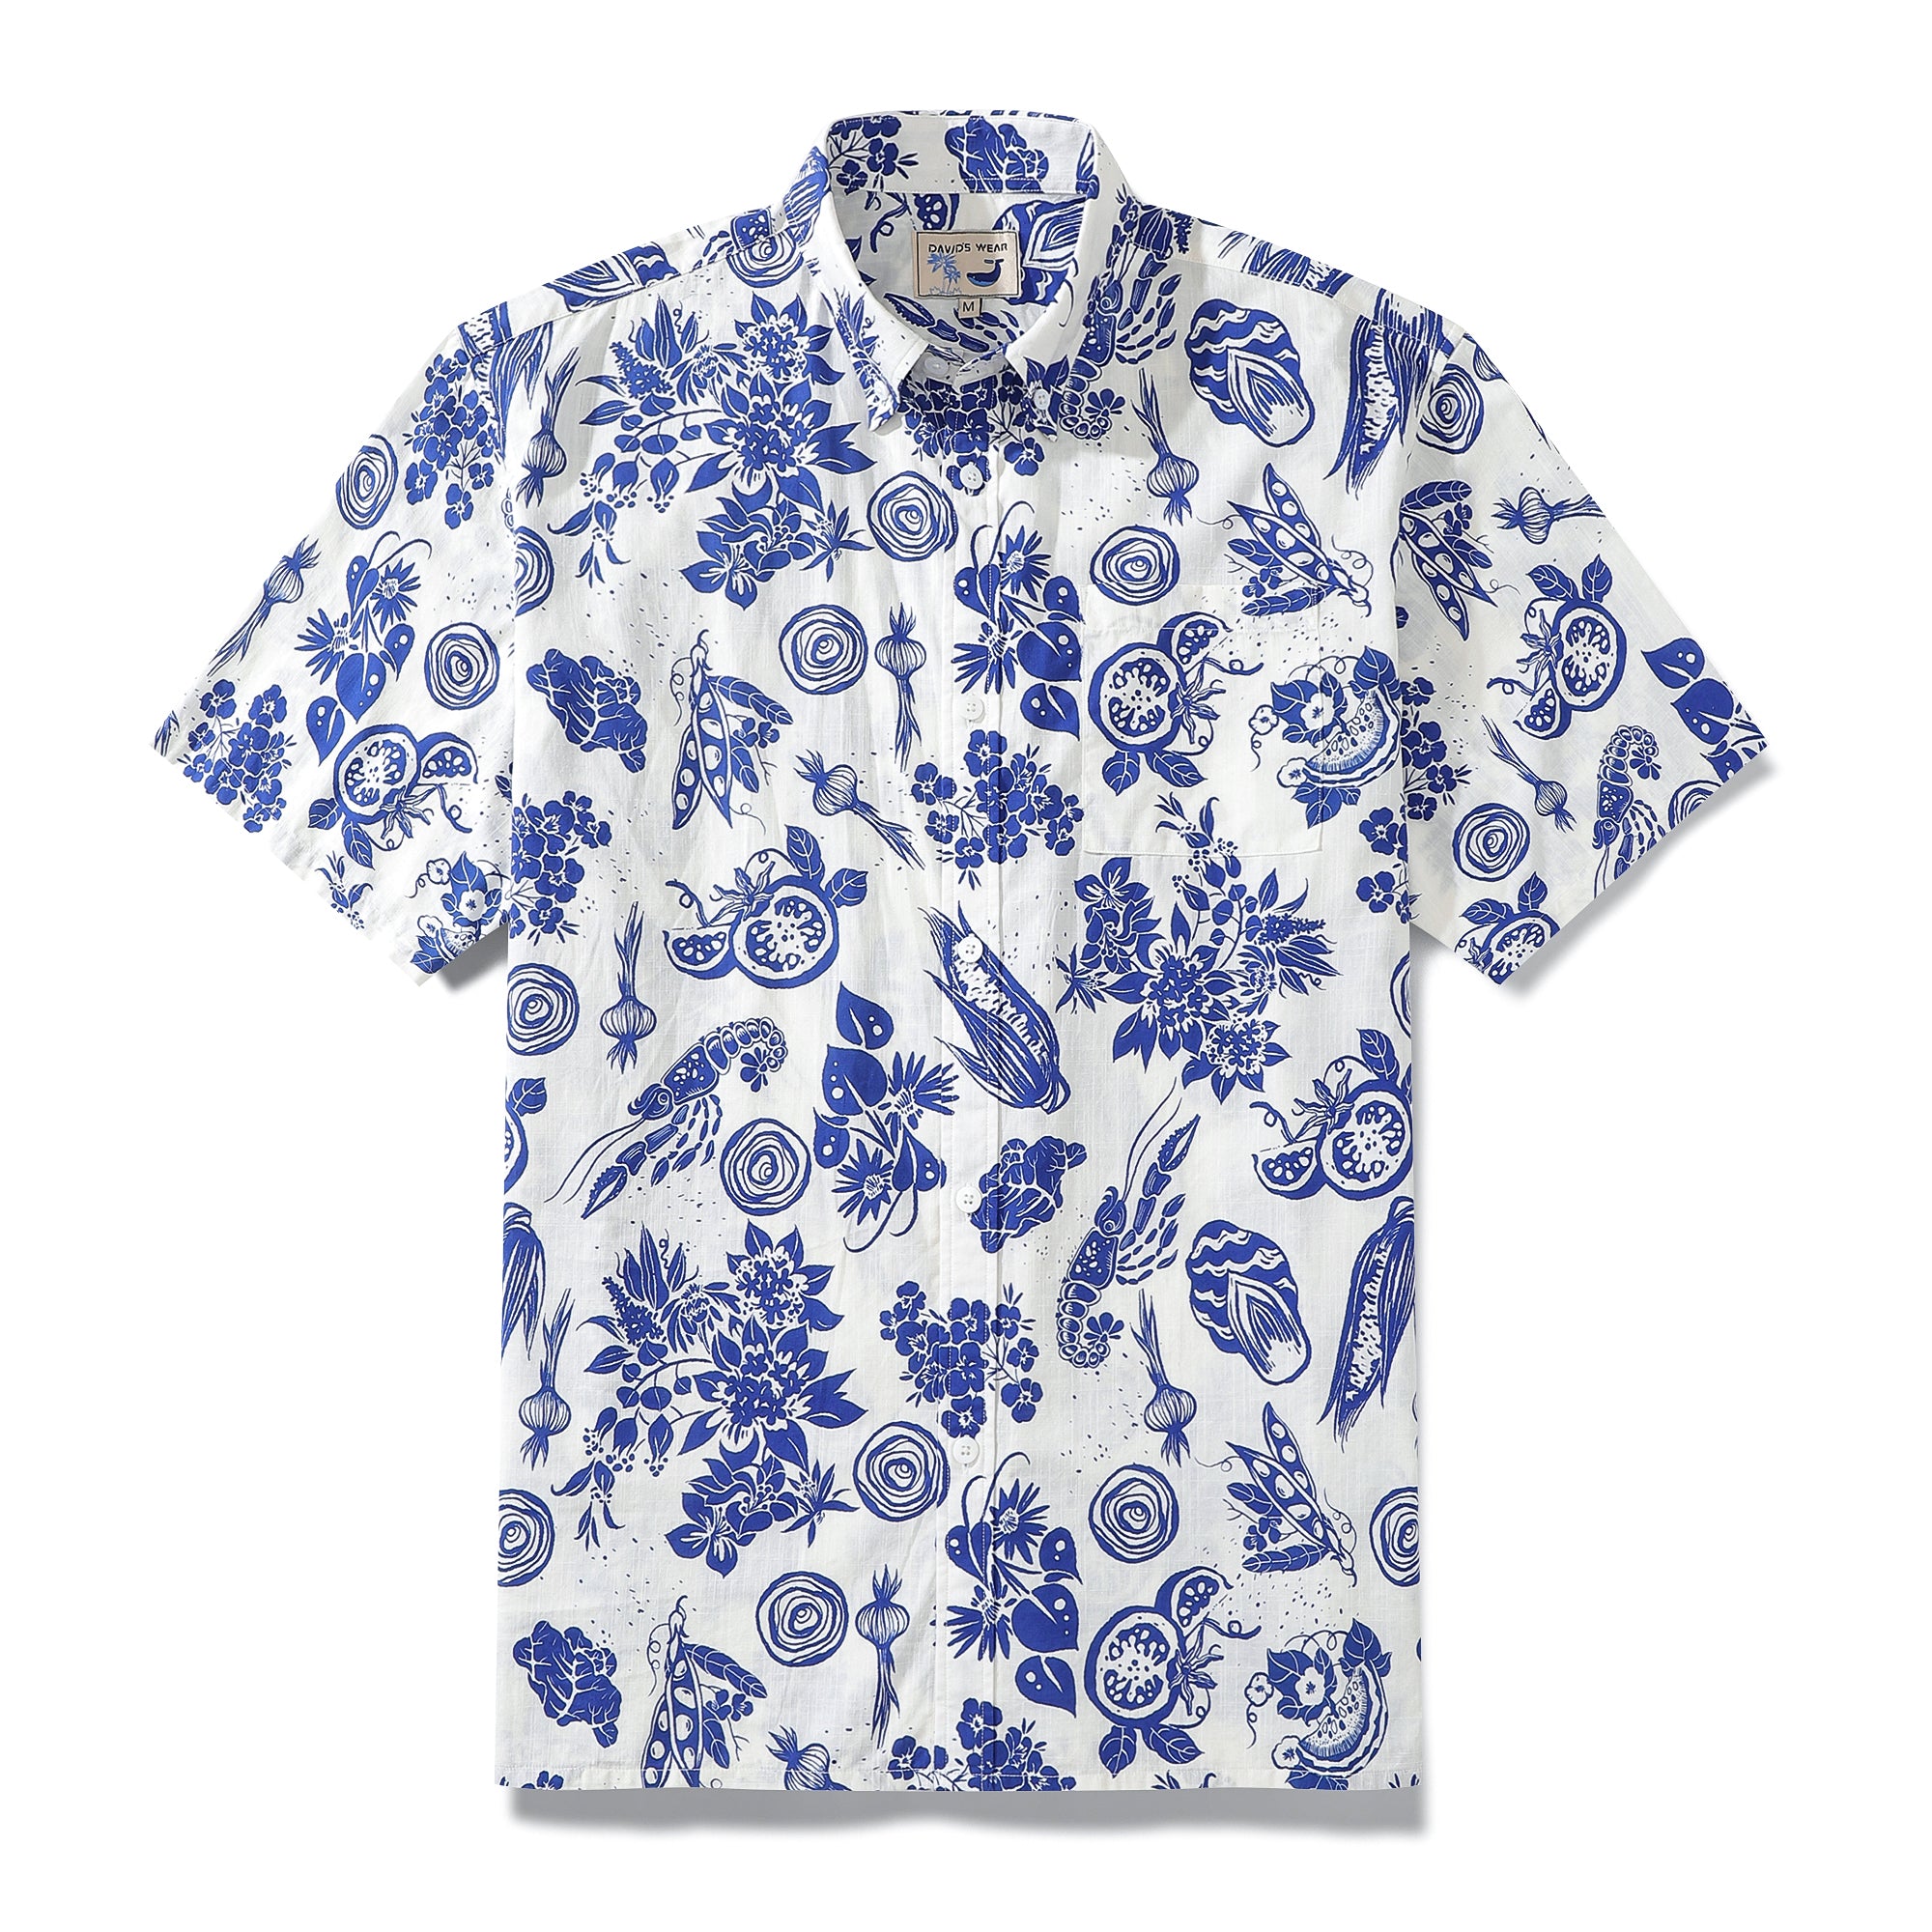 Hawaiian Shirt For Men Shrimp and Vegetable Blue and White Bicolor Print Short Sleeve Cotton Button Down